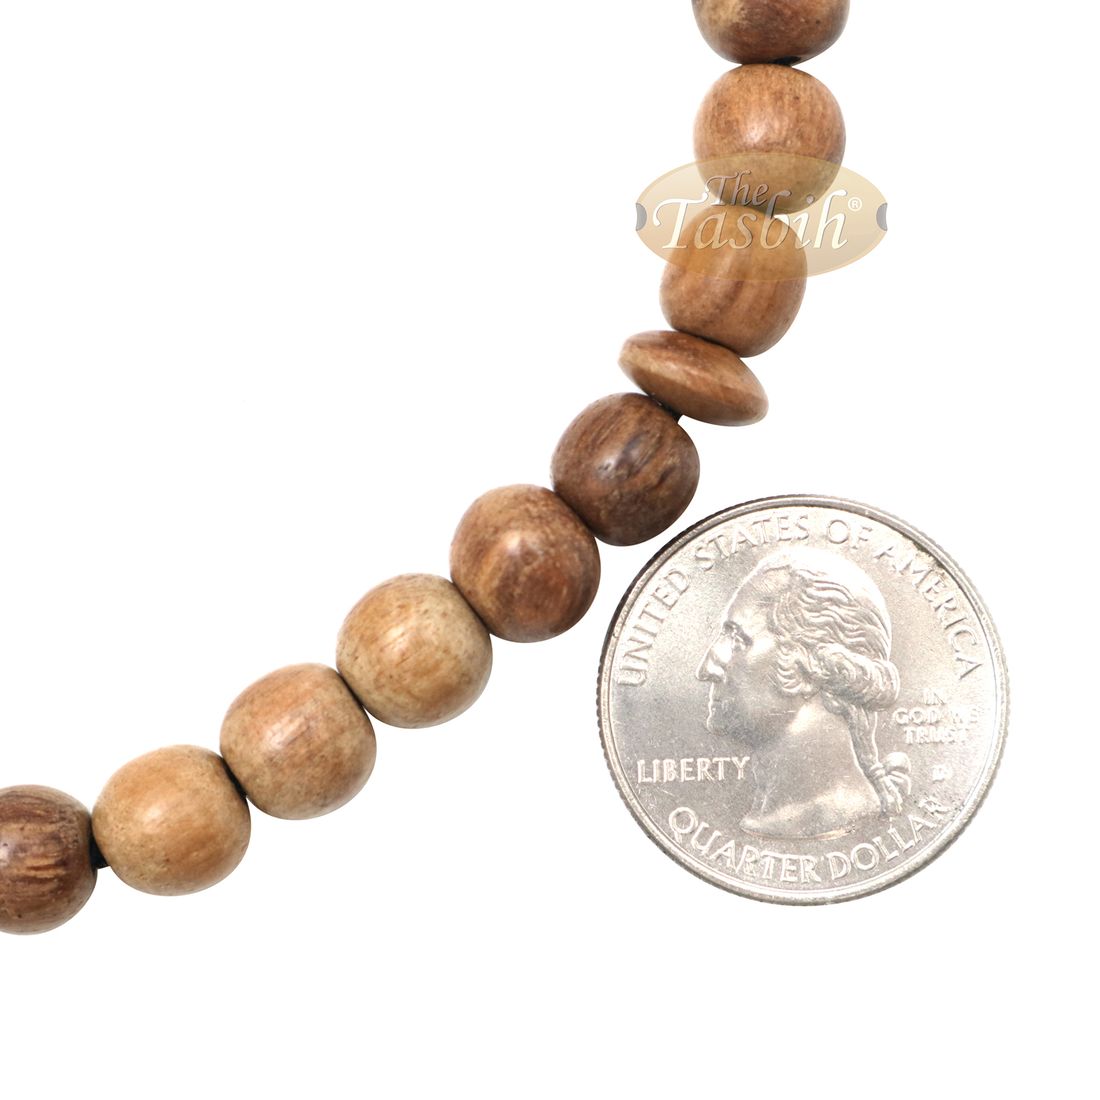 Small Natural Light Brown Oud Aloeswood Agarwood 33-Bead Prayer Beads Rosary 8mm Beads with 2 Black Copper-decorated Tassel